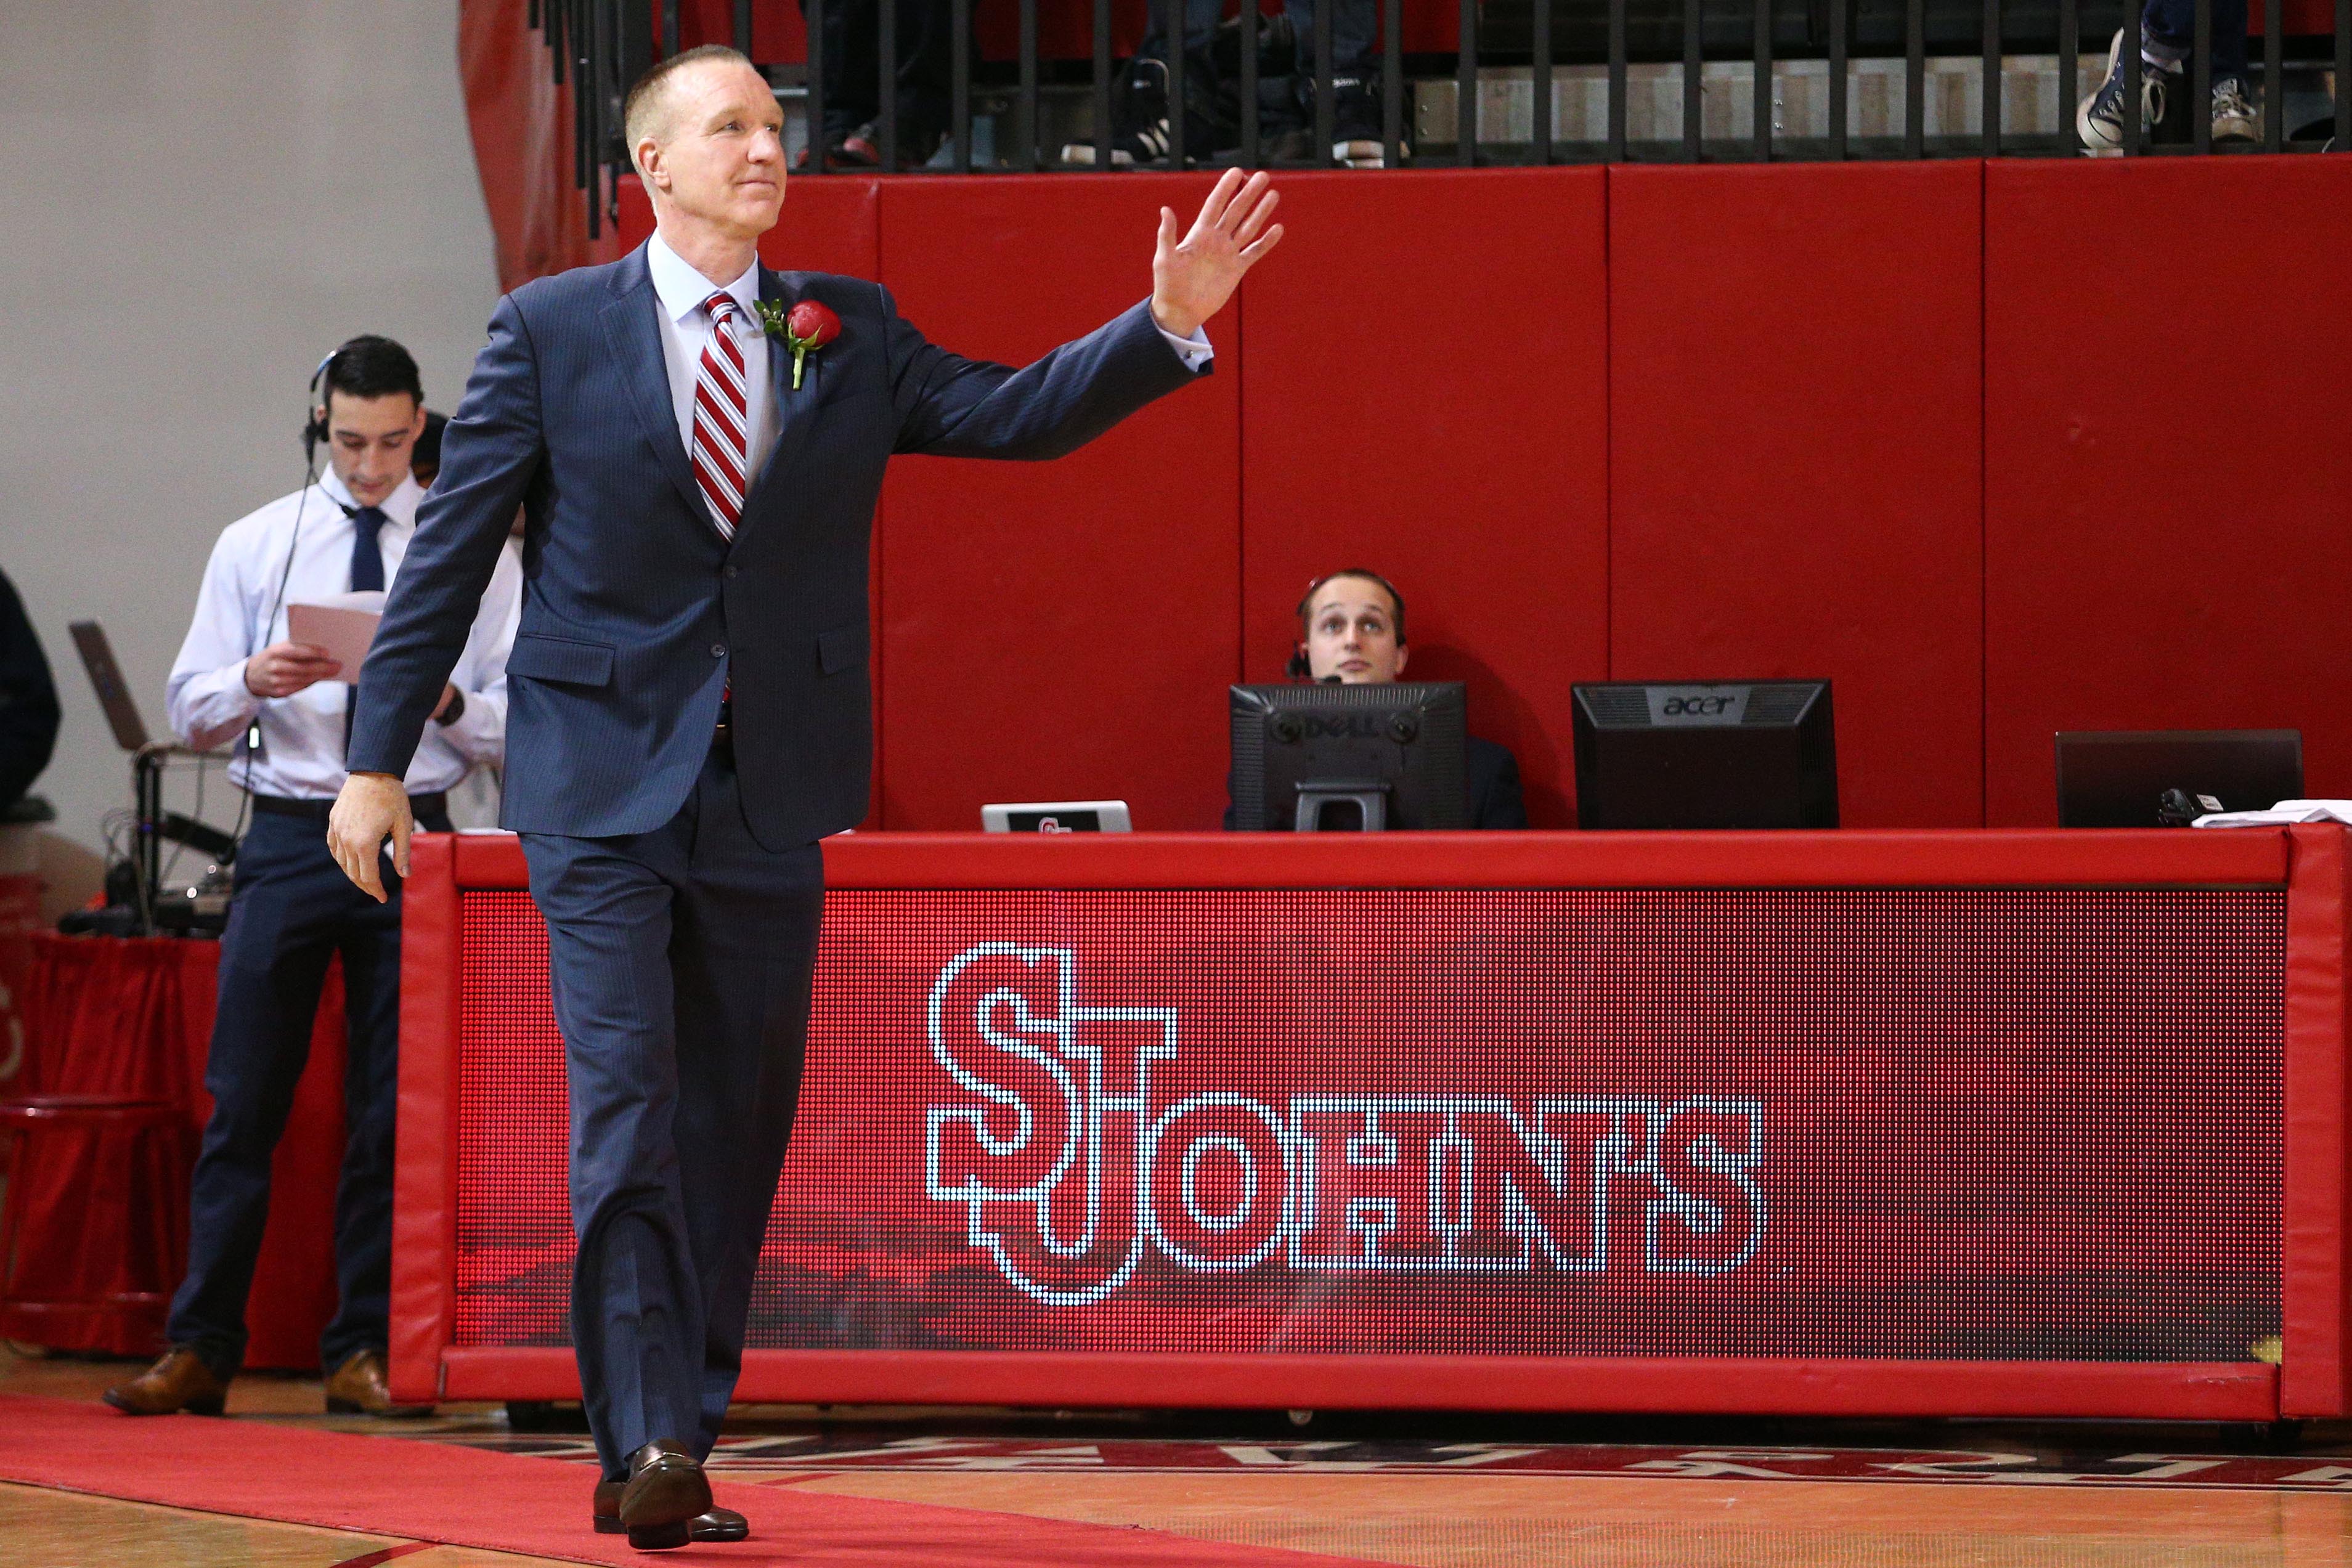 Feb 21, 2015; Jamaica, NY, USA; St. John's Red Storm alum Chris Mullin is inducted into the St. John's hall of fame during halftime against the Seton Hall Pirates at Carnesecca Arena. Mandatory Credit: Brad Penner-USA TODAY Sports